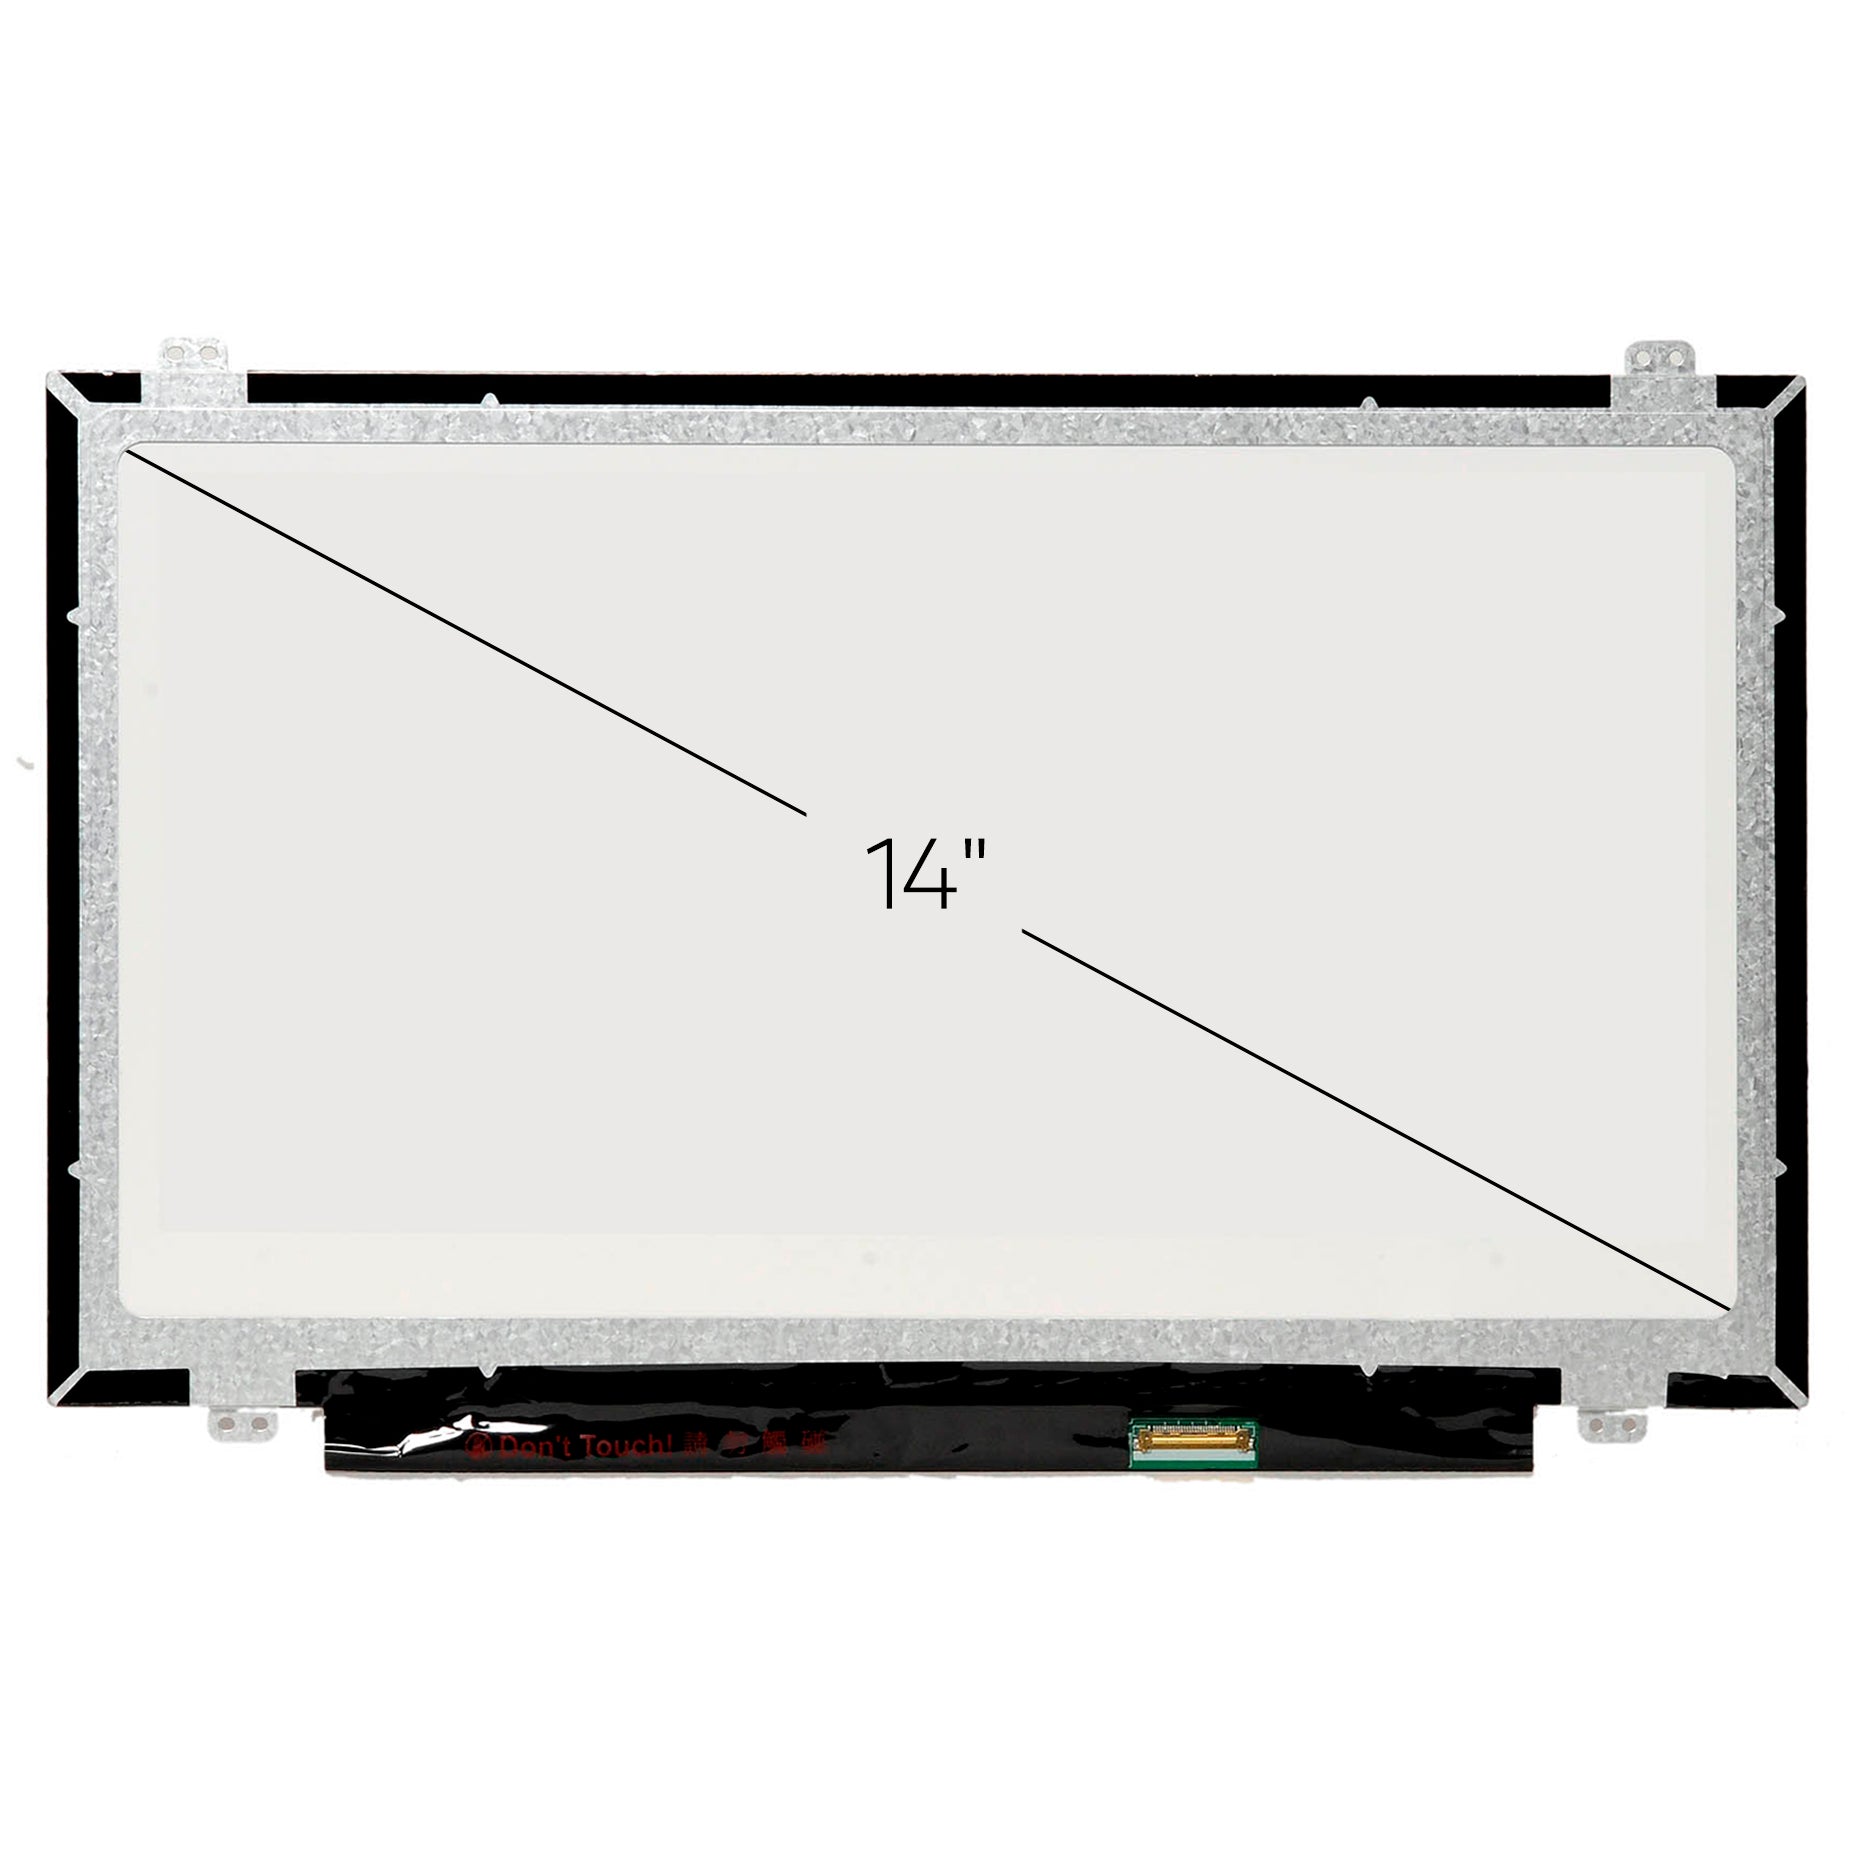 Screen Replacement for HP Chromebook 14-CA023NR 4BS38UA HD 1366x768 Glossy LCD LED Display